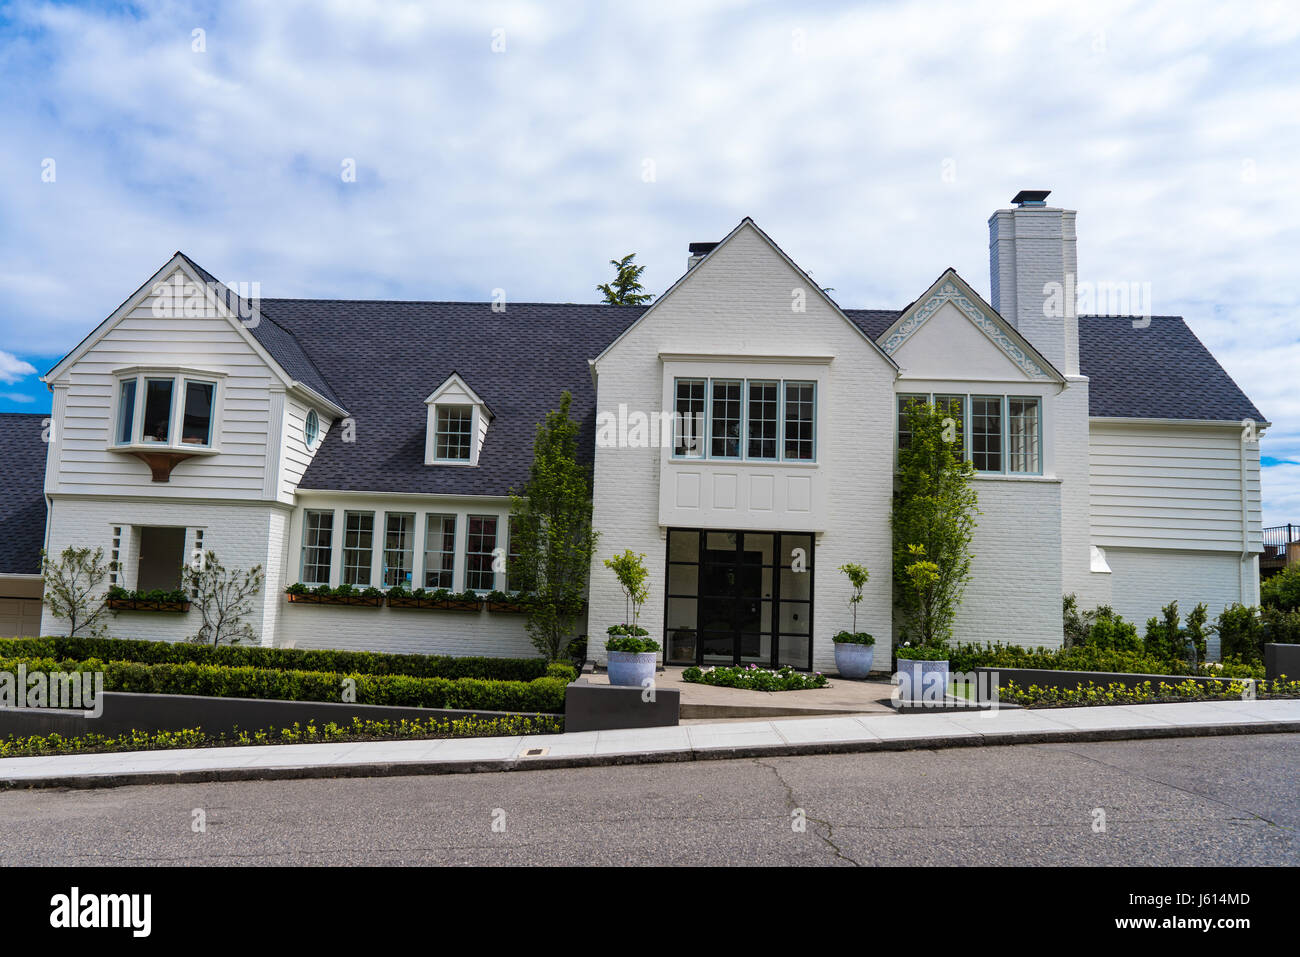 Expensive Suburban White Brick House With Landscaping Stock Photo Alamy